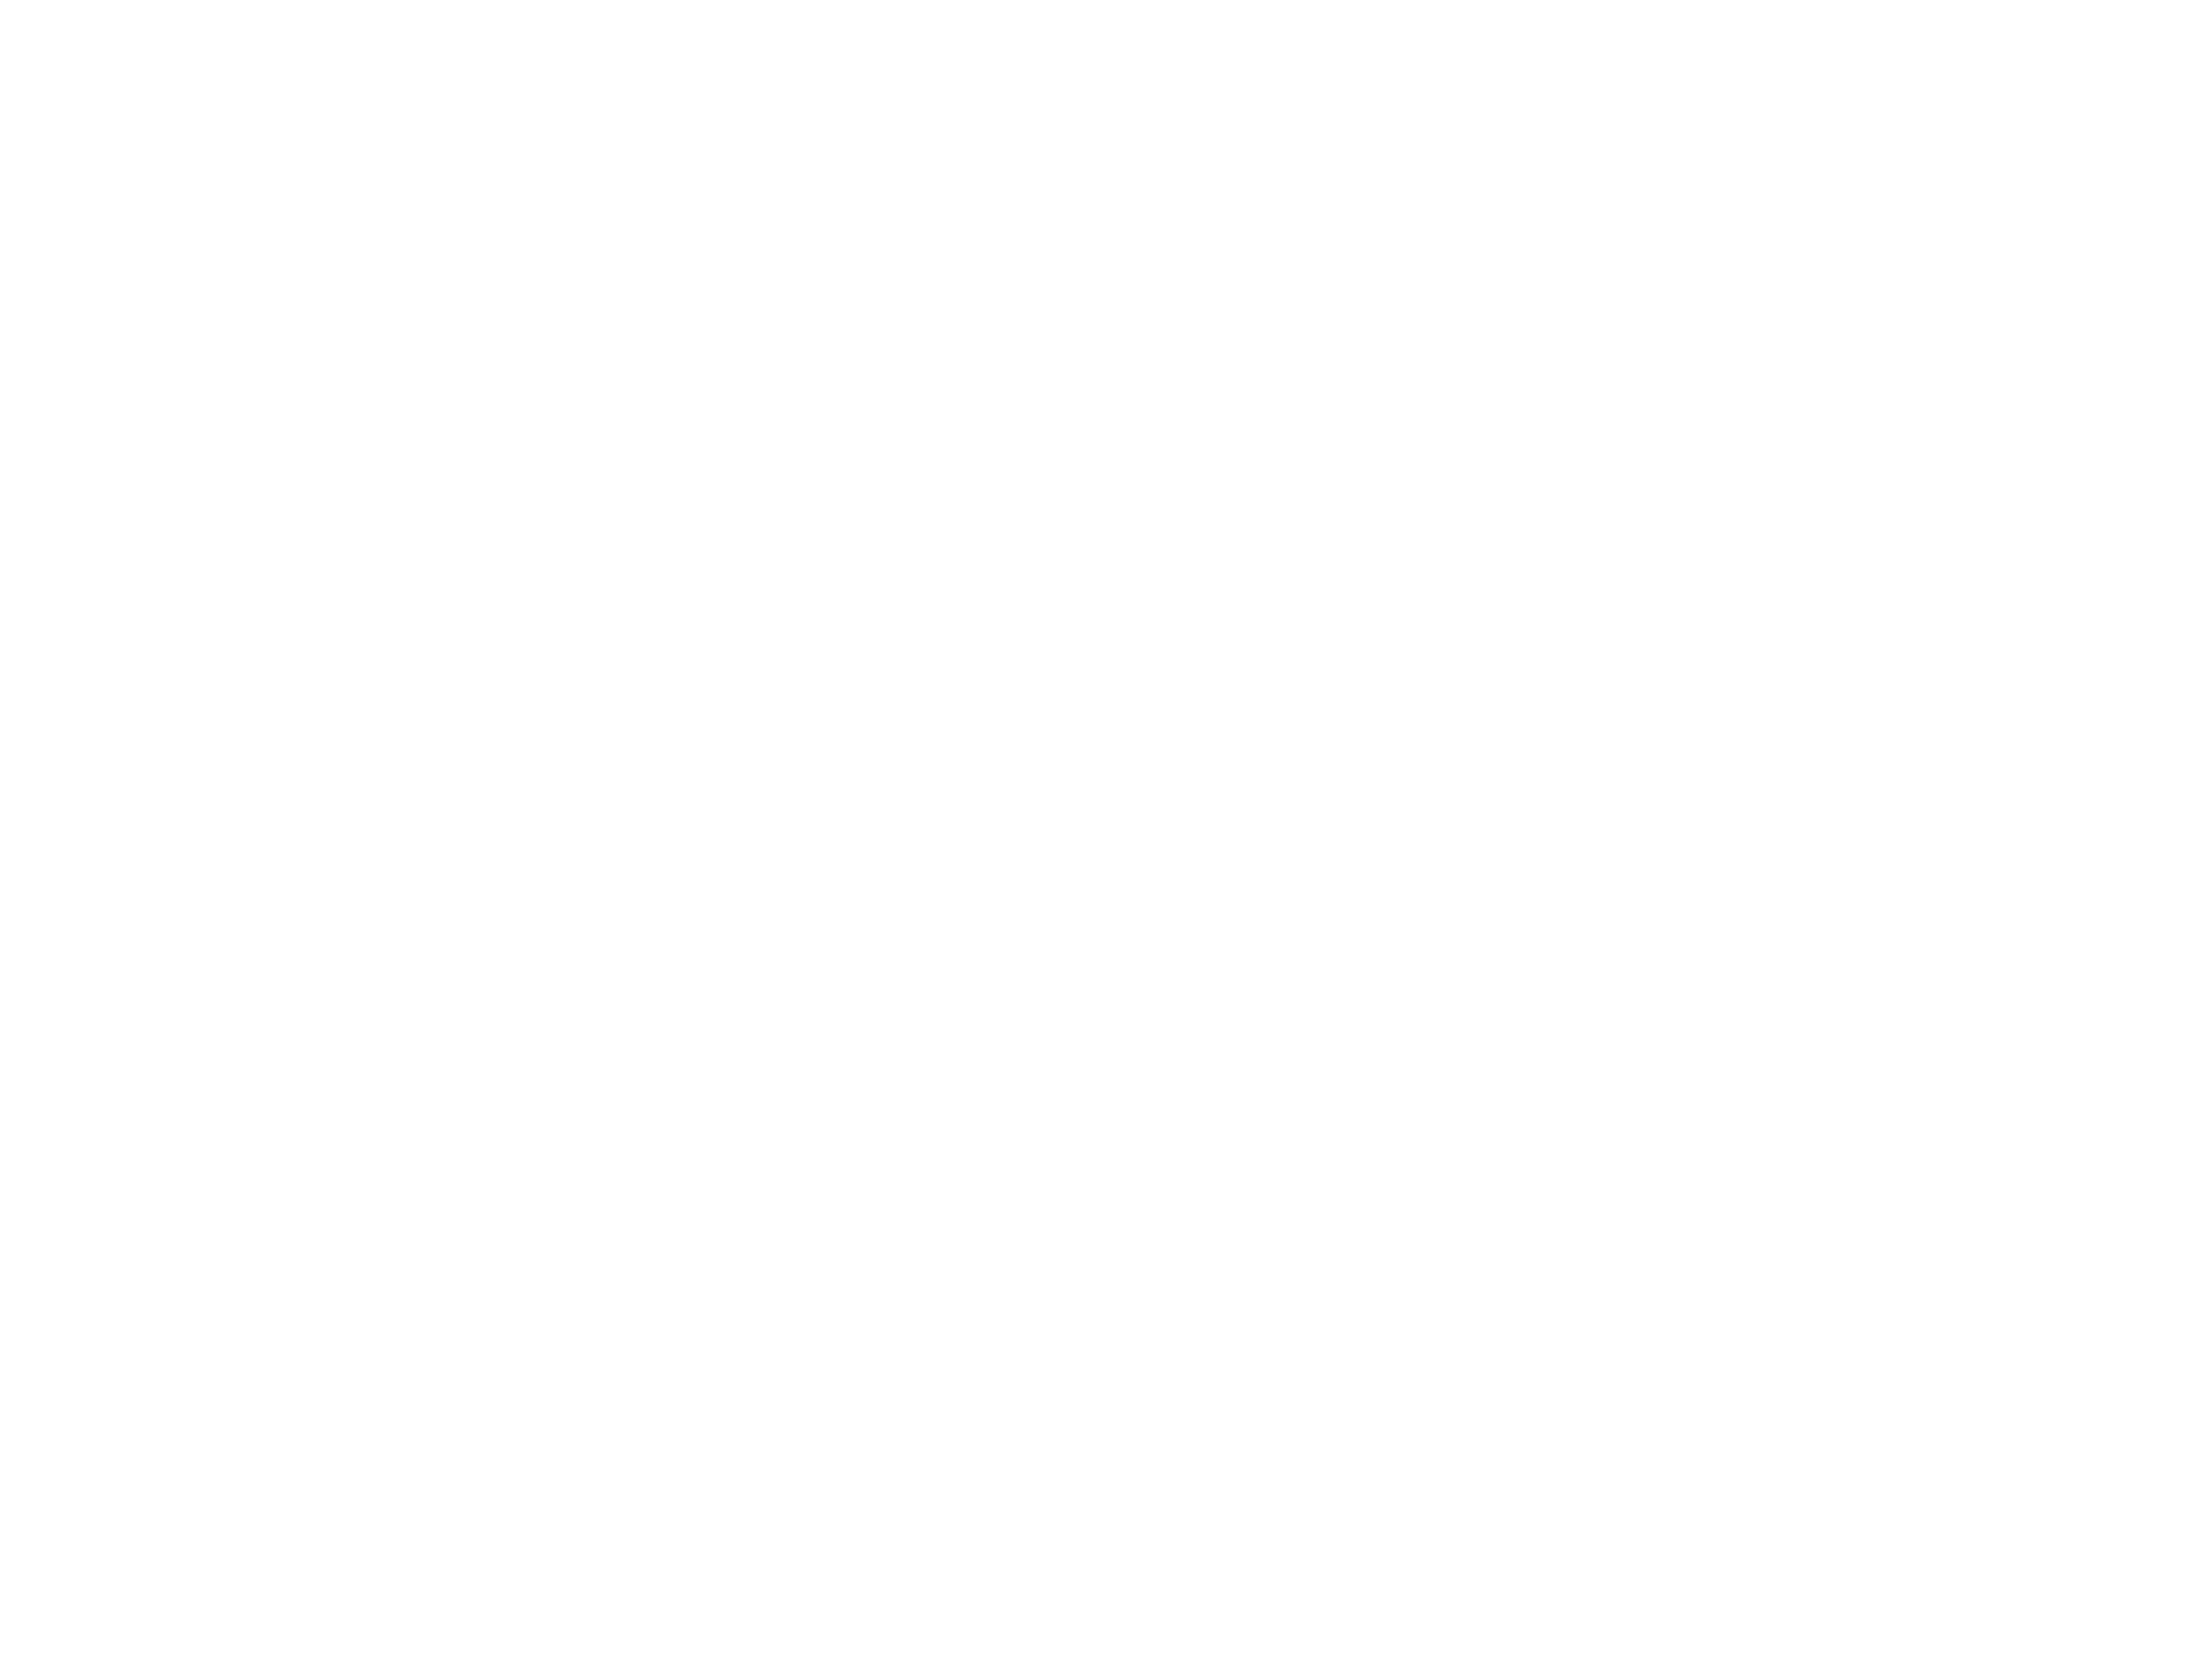 MATH TUTORING is a tuition and maths enrichment project that combines face-to-face tuition in small groups with an online platform. It is aimed towards providing learning support to the students who need it the most.